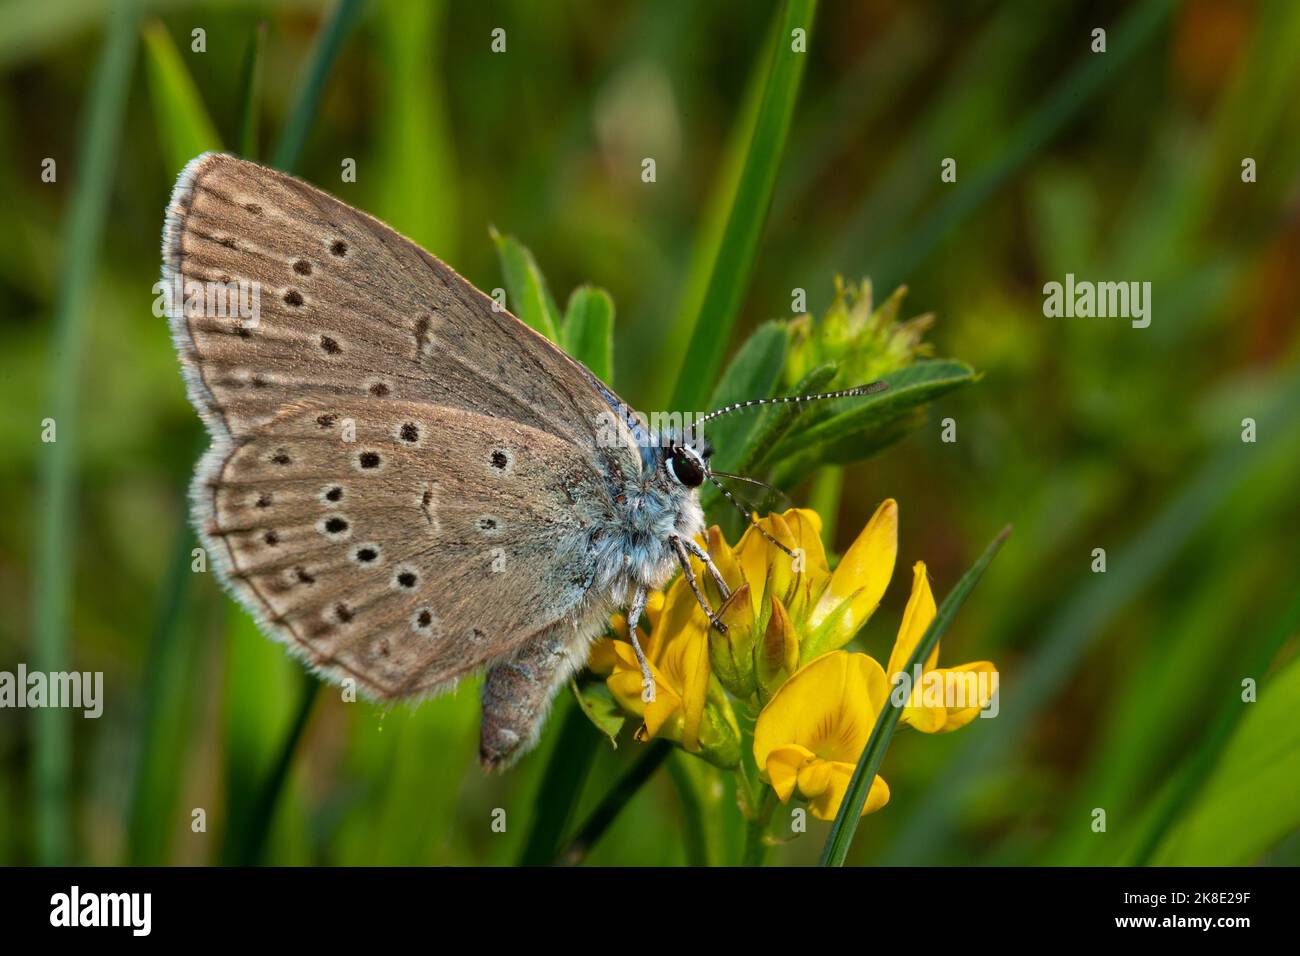 Mountain Alcon blue butterfly with closed wings sitting on yellow flower right sighted Stock Photo